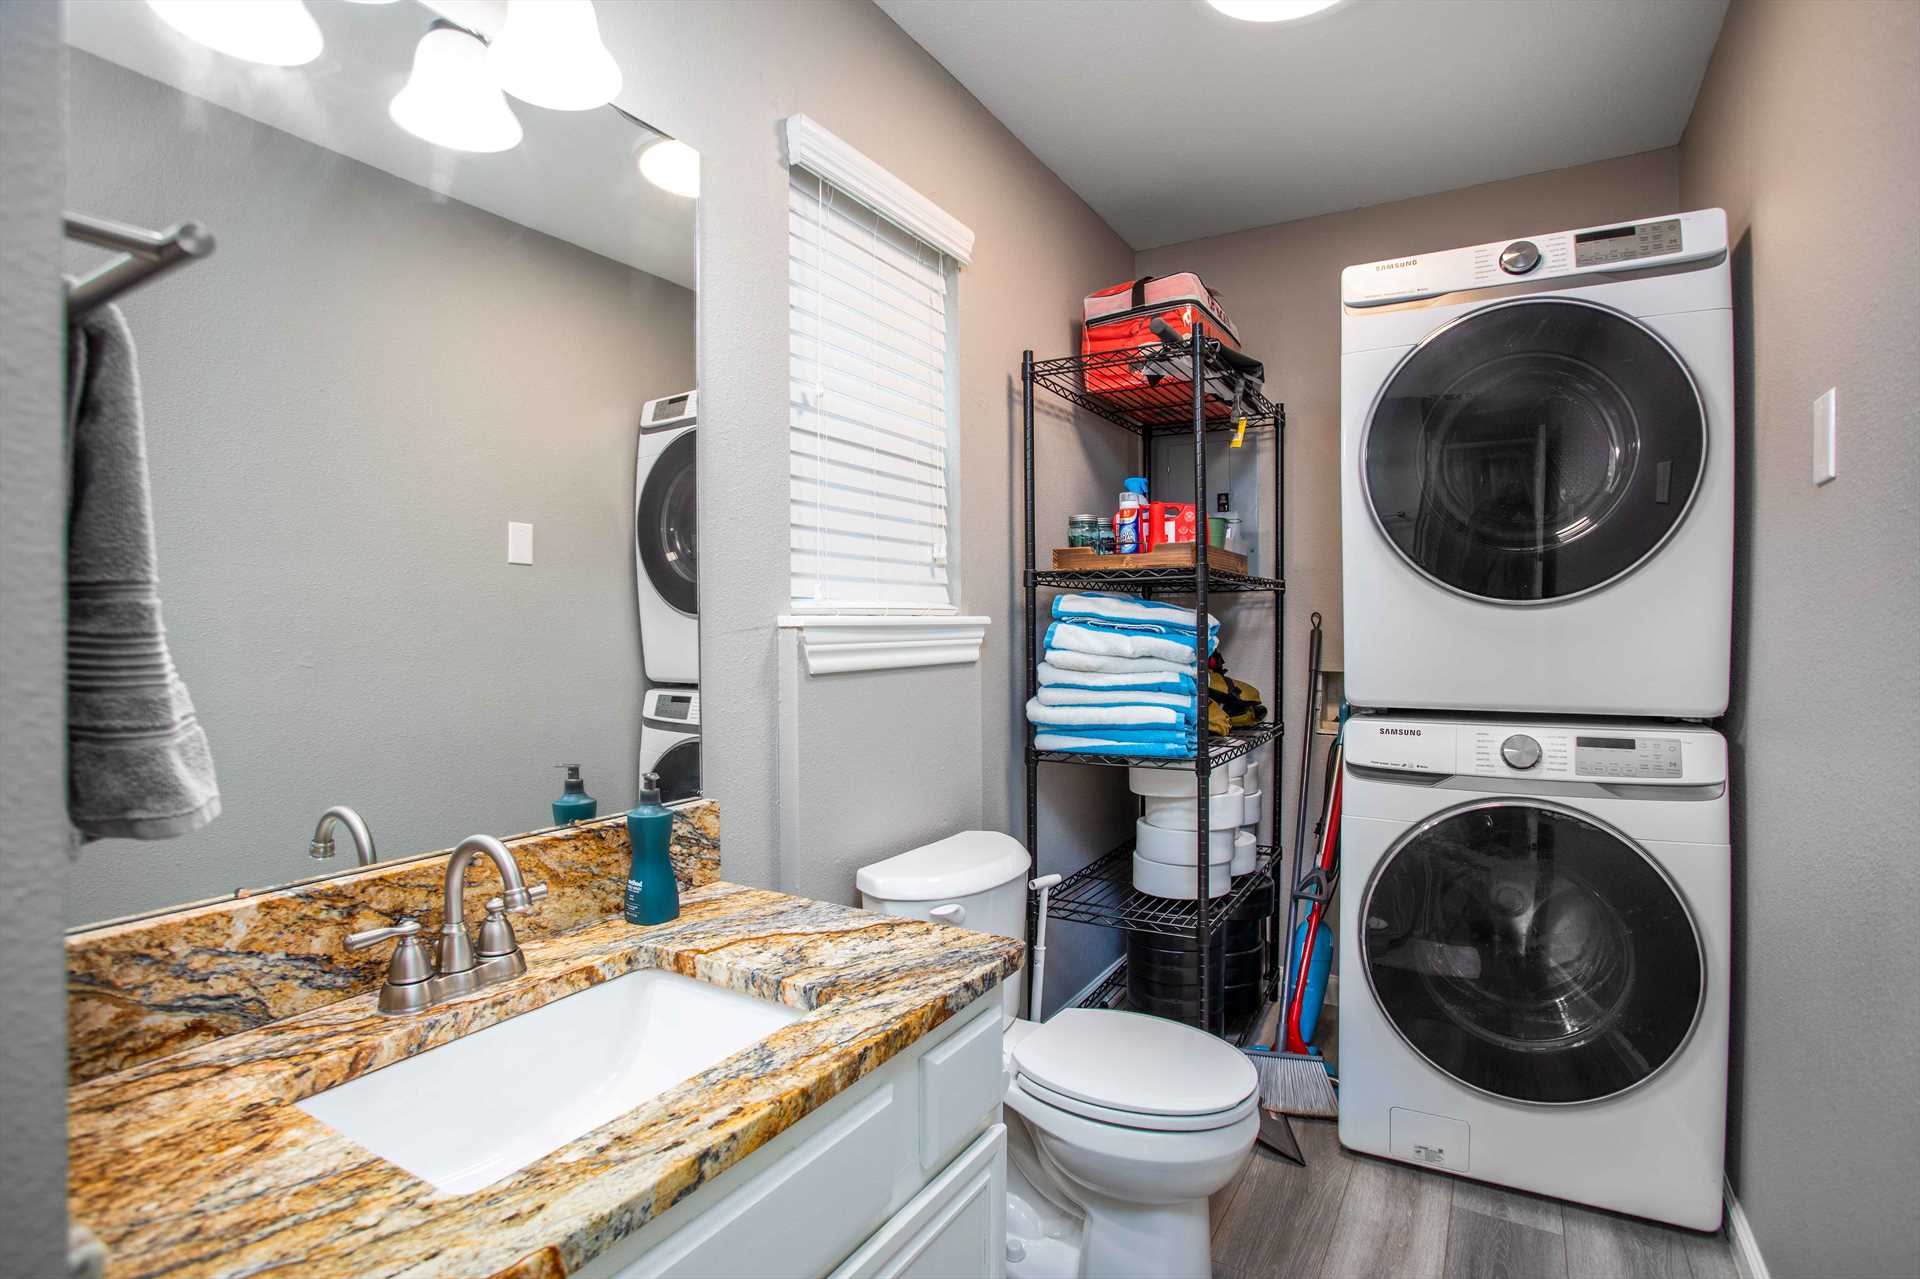                                                 The half-bath at the Retreat includes a convenient laundry nook, so clean clothes won't be a hassle!